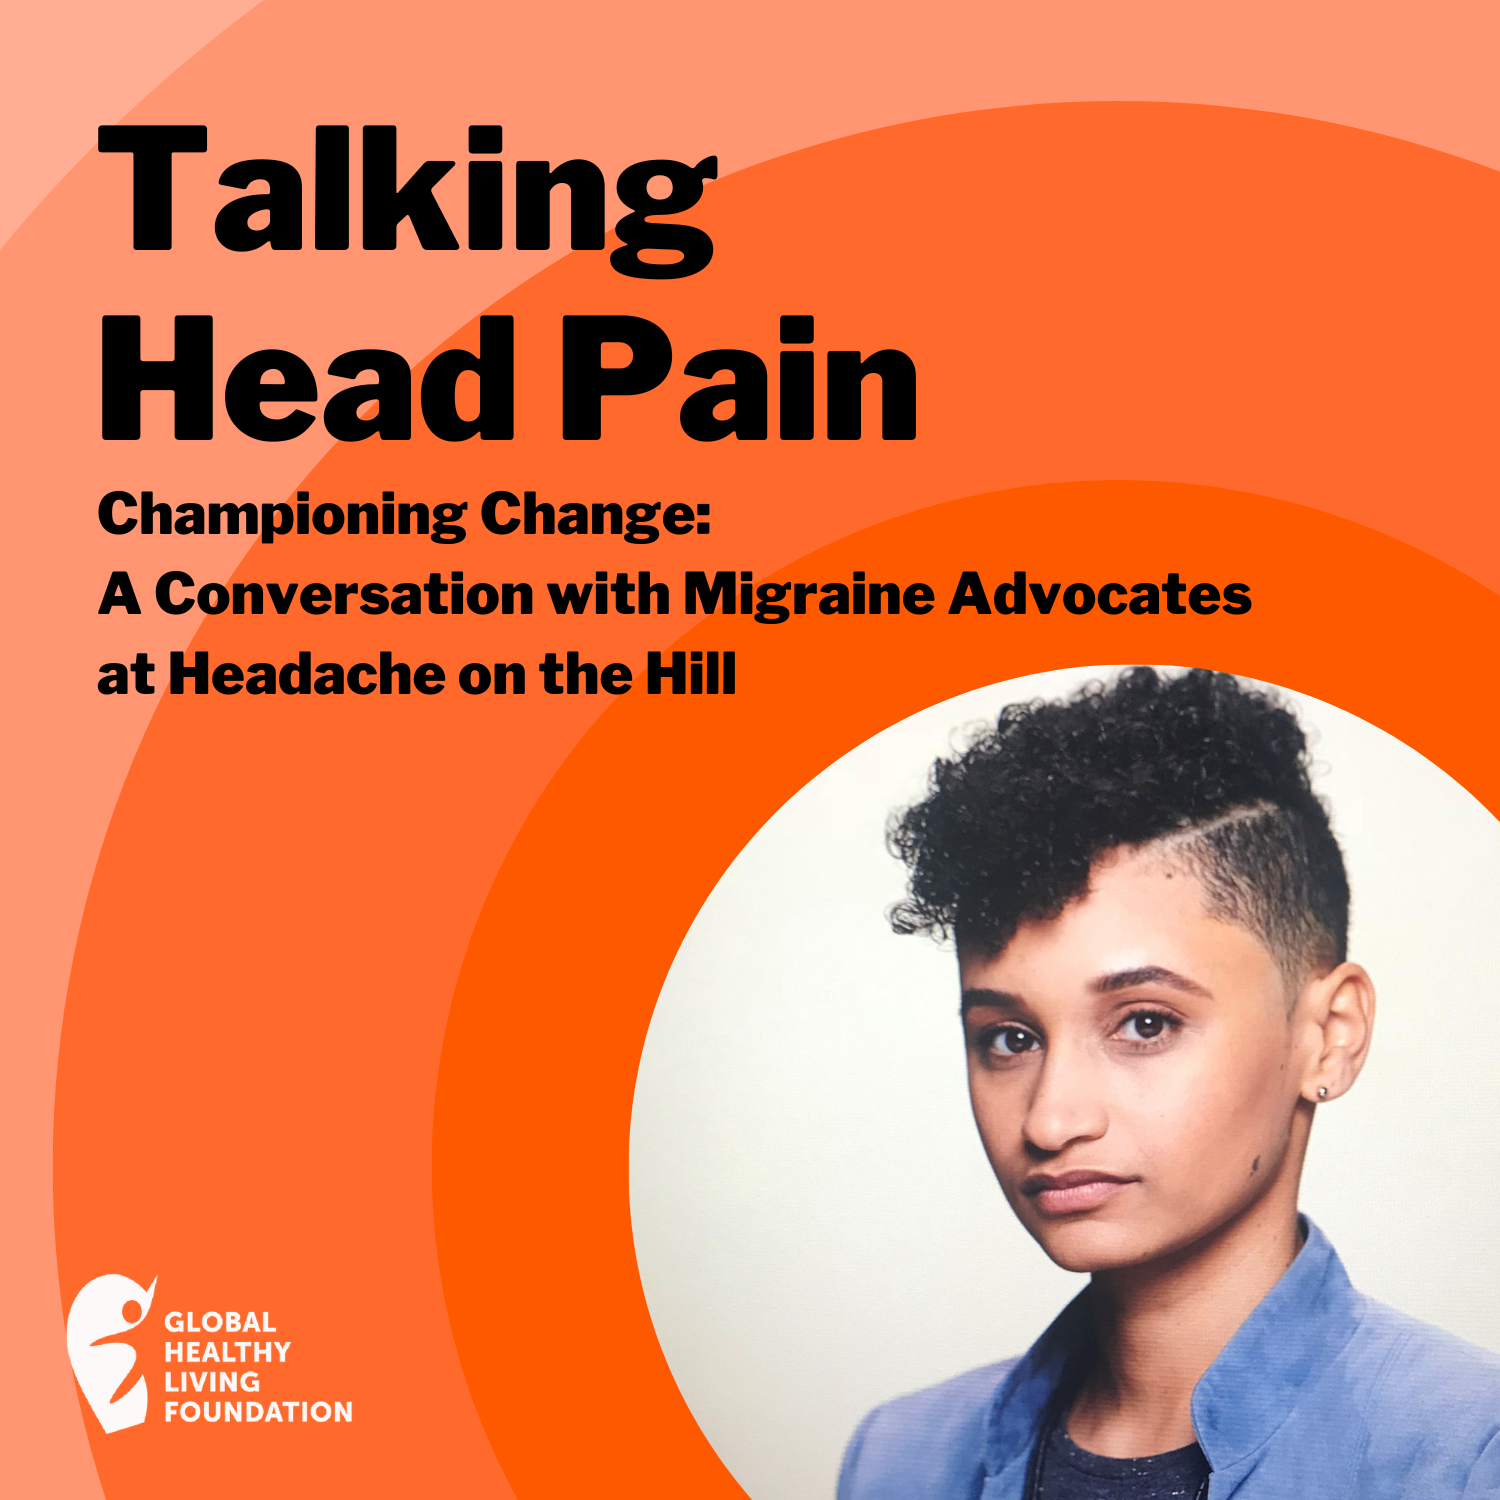 Championing Change: A Conversation with Migraine Advocates at Headache on the Hill